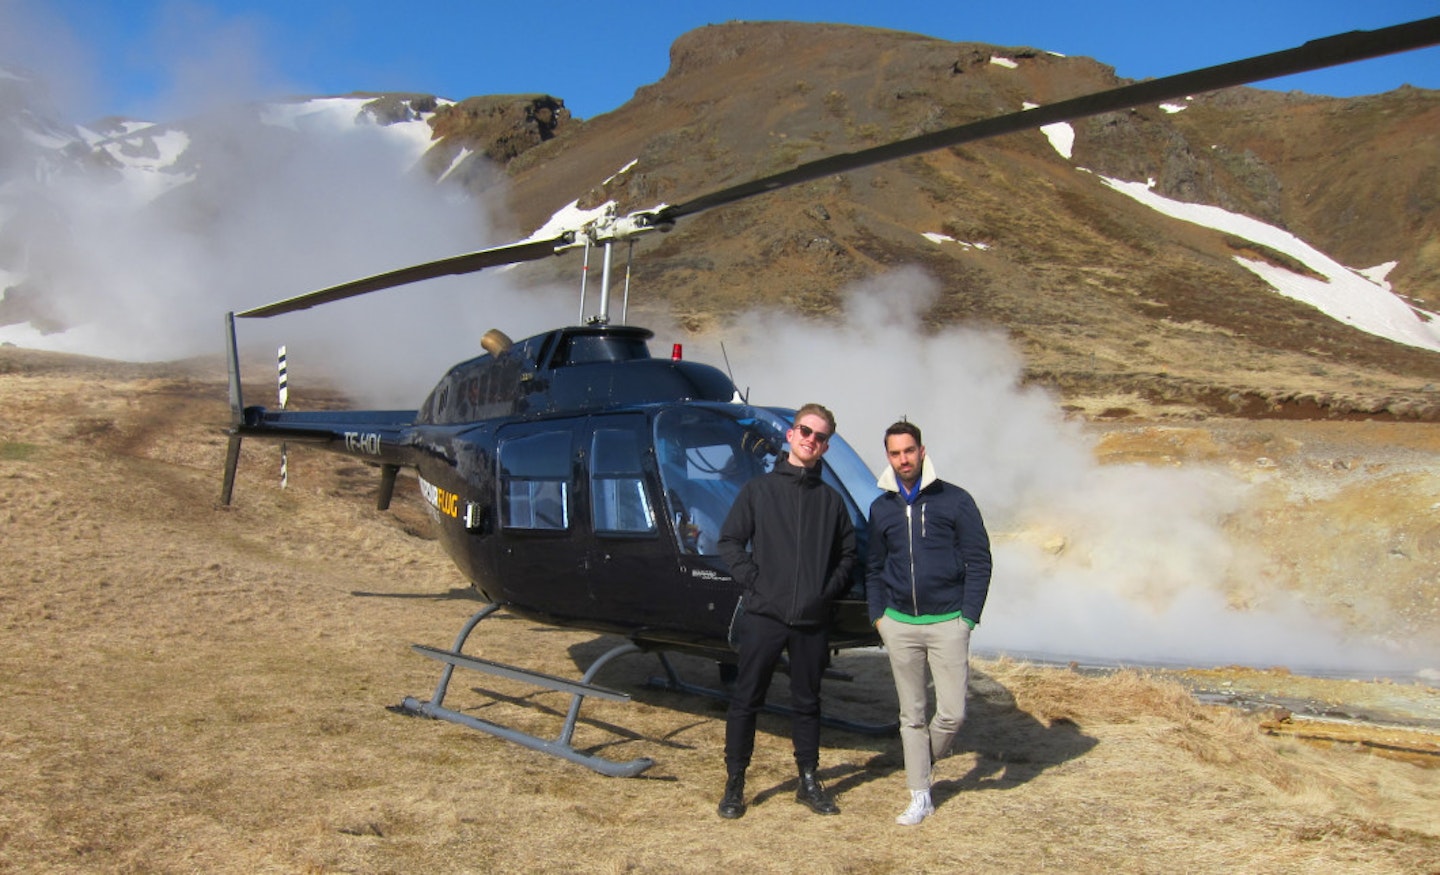 Having a James Bond moment outside the helicopter